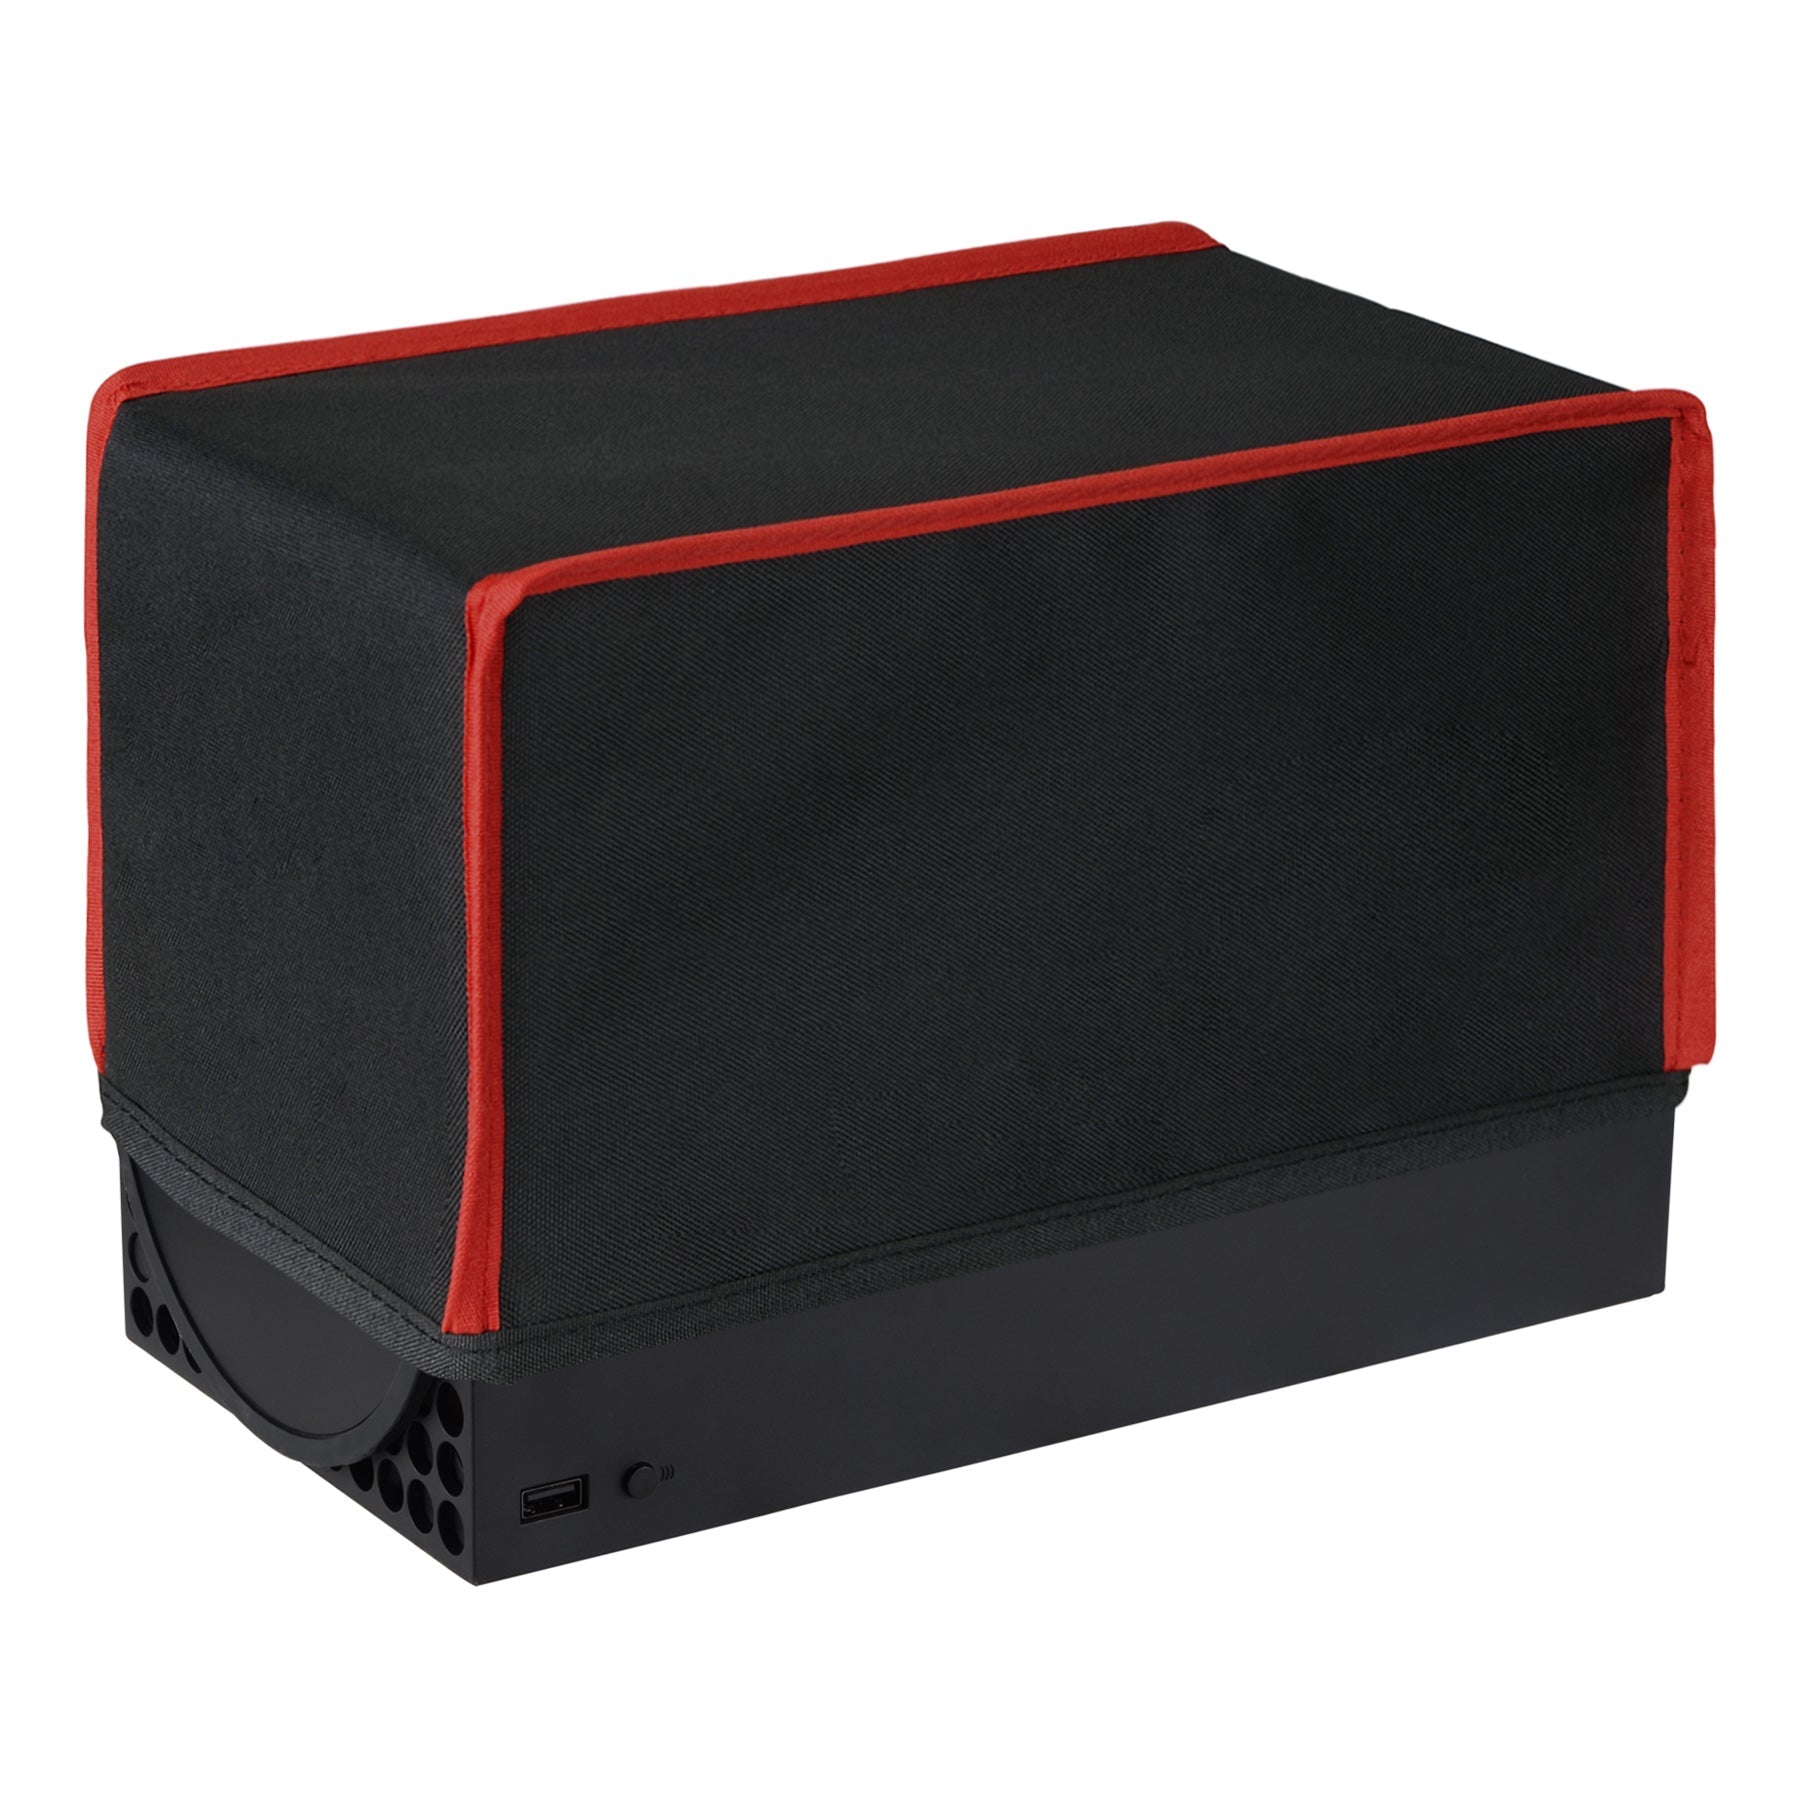 PlayVital Black & Red Trim Nylon Horizontal Dust Cover for Xbox Series X Console, Soft Neat Lining Dust Guard, Anti Scratch Waterproof Cover Sleeve for Xbox Series X Console - X3PJ019 PlayVital